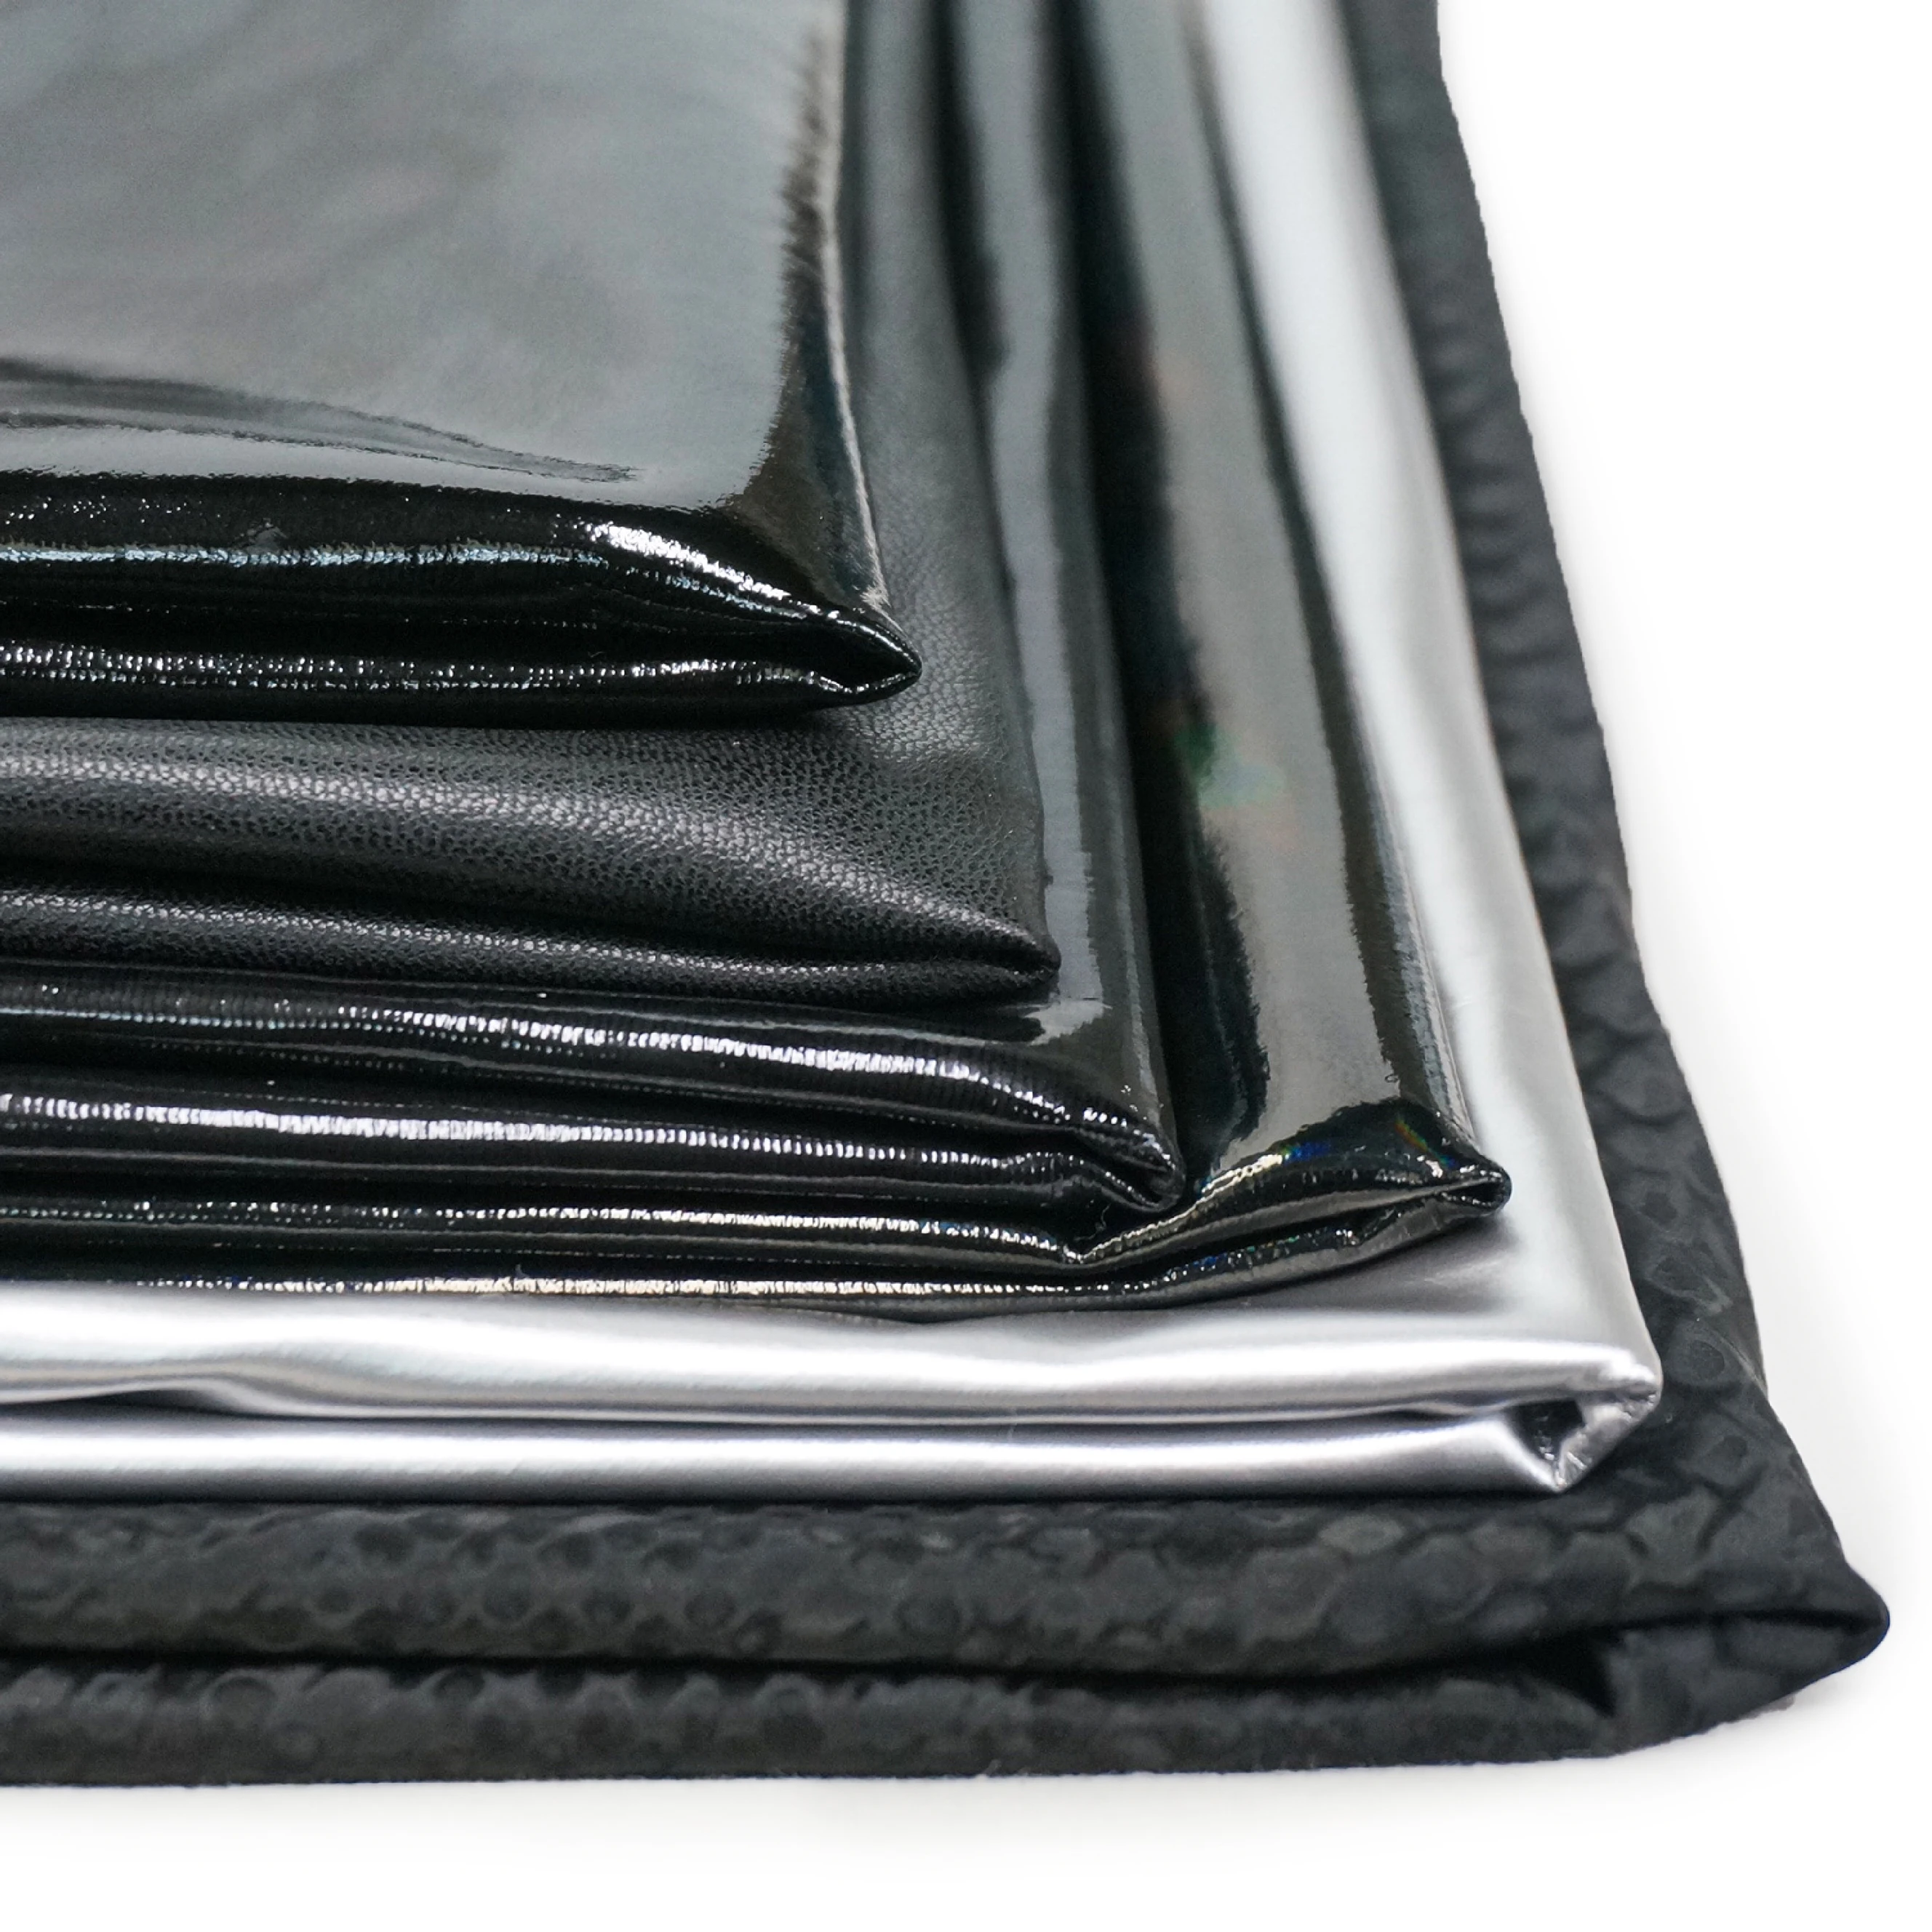 Cigno Leather Presents: Customizable Pattern Mirror/Matte Finish Glossy PU Faux Leather for Garment Manufacturing